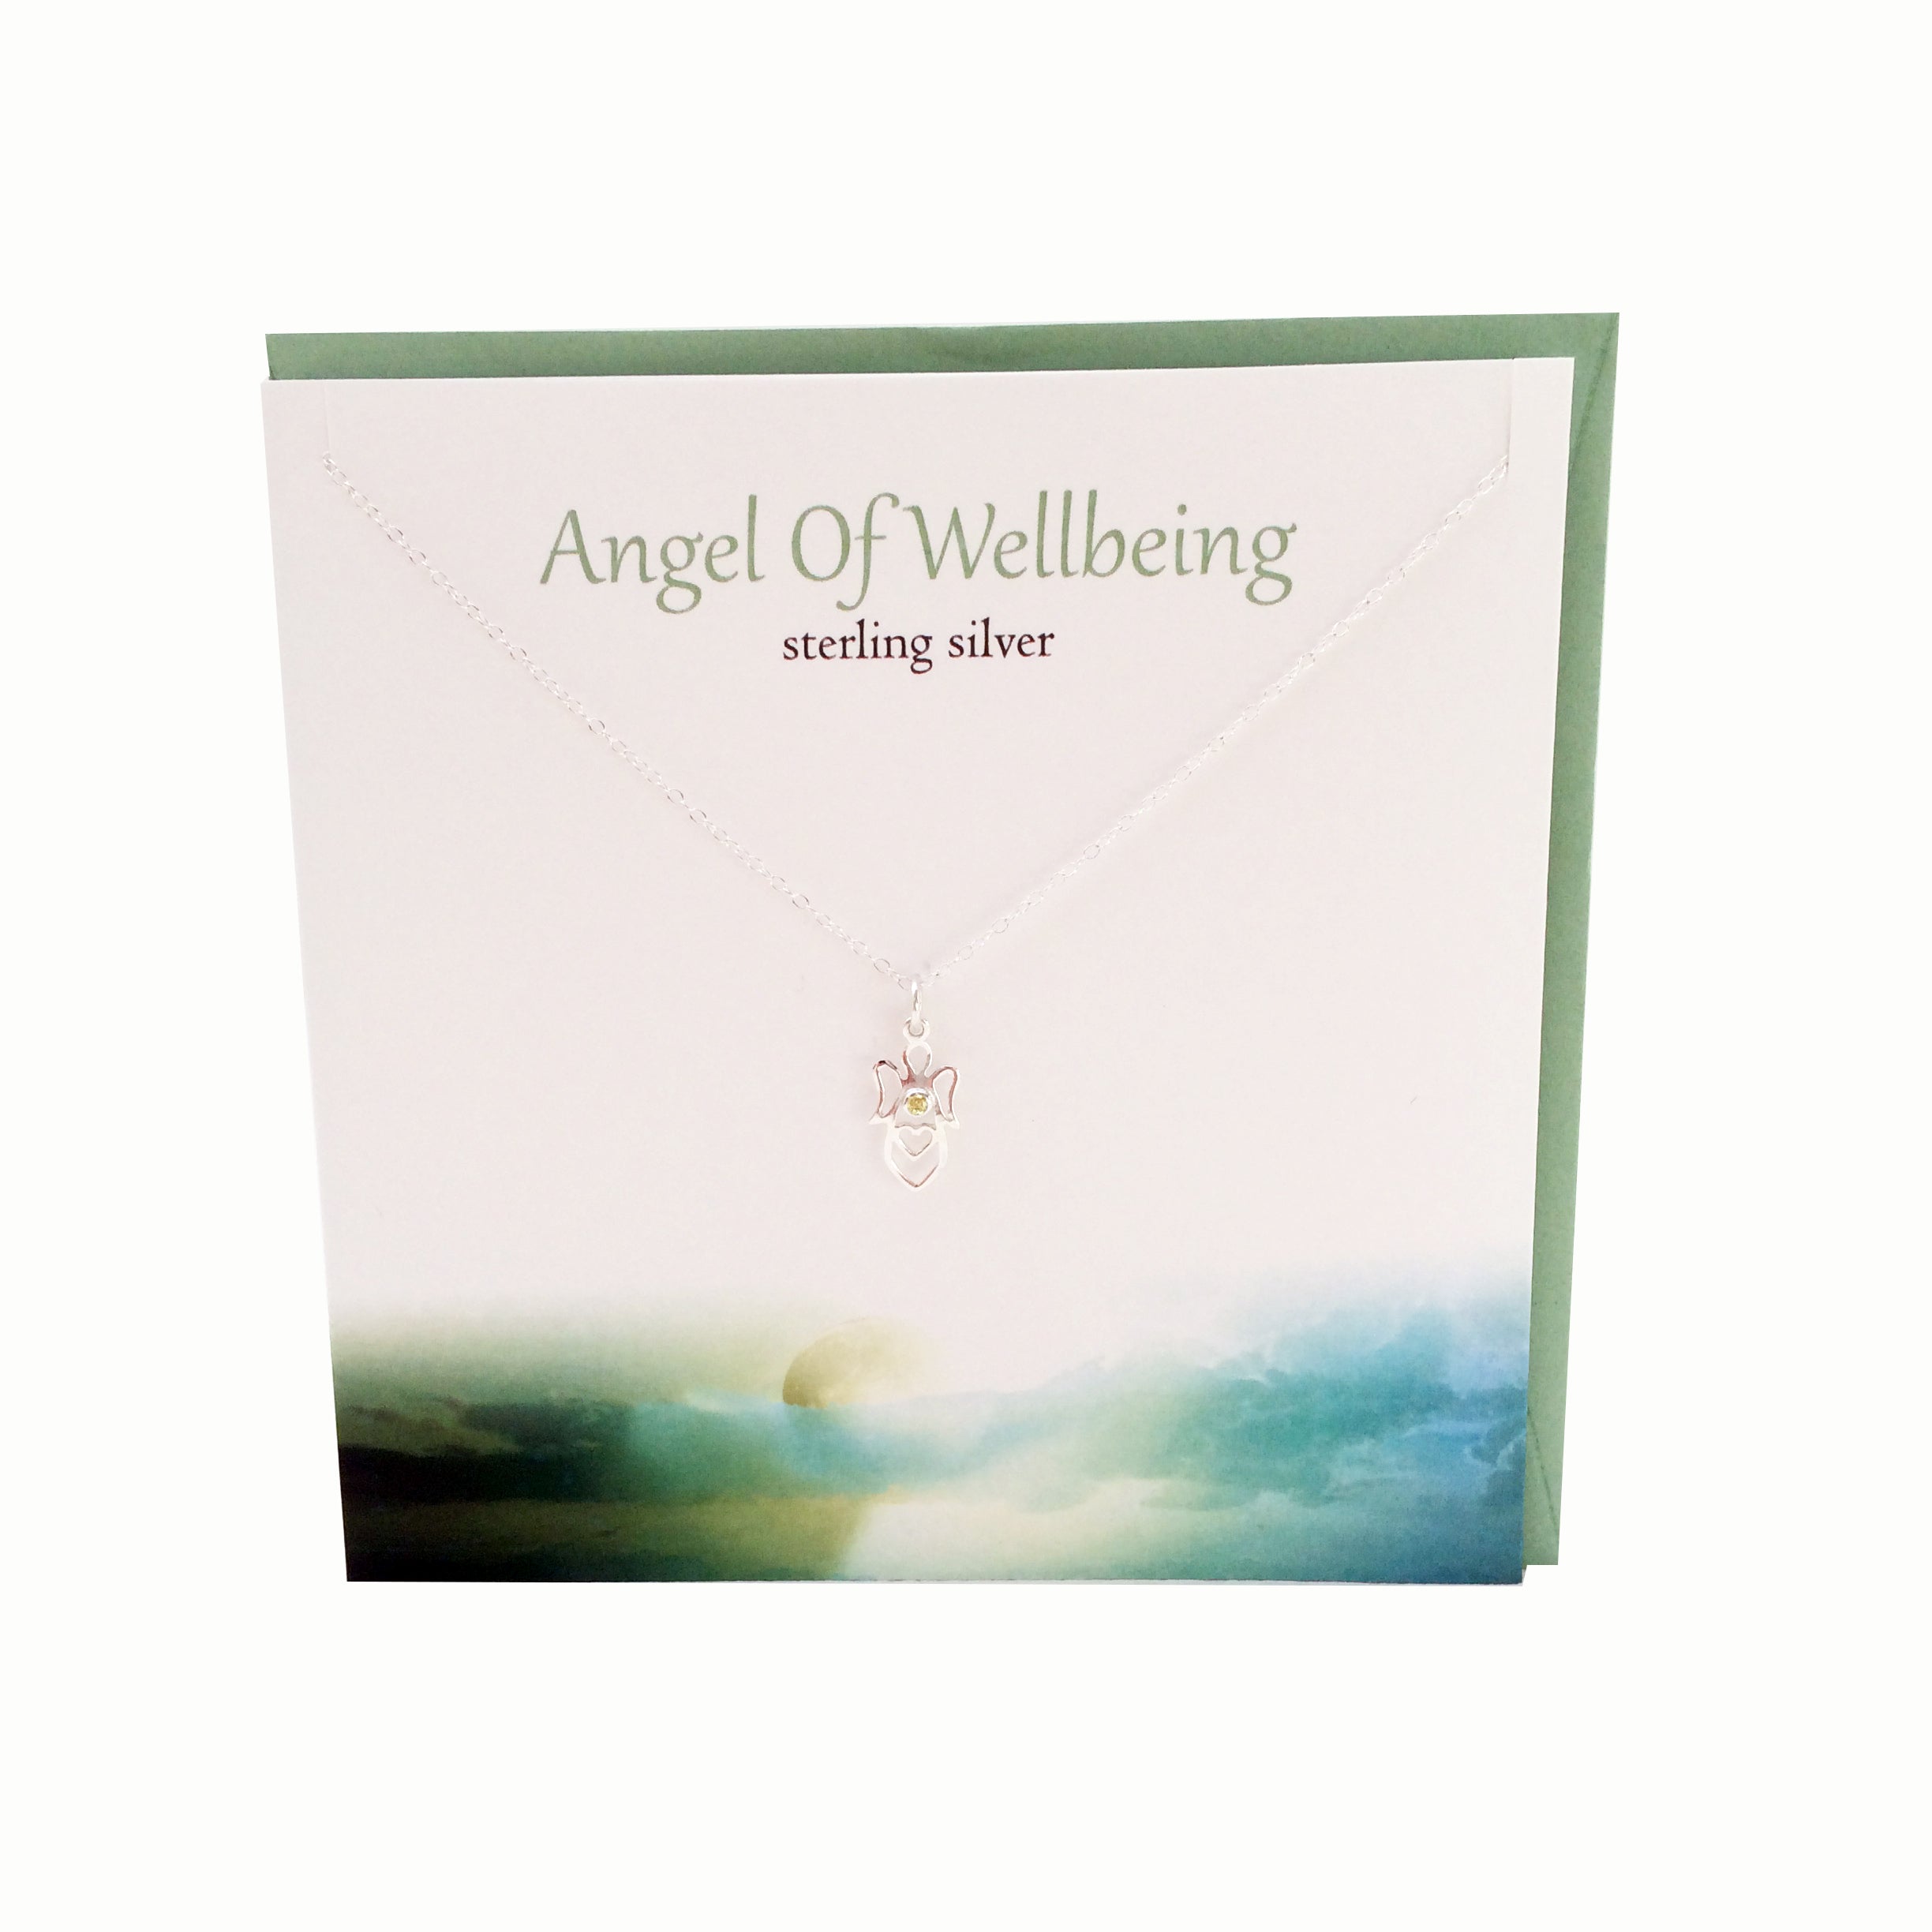 Angel of Well being silver necklace | The SILVER sTUDIO sCOTLAND